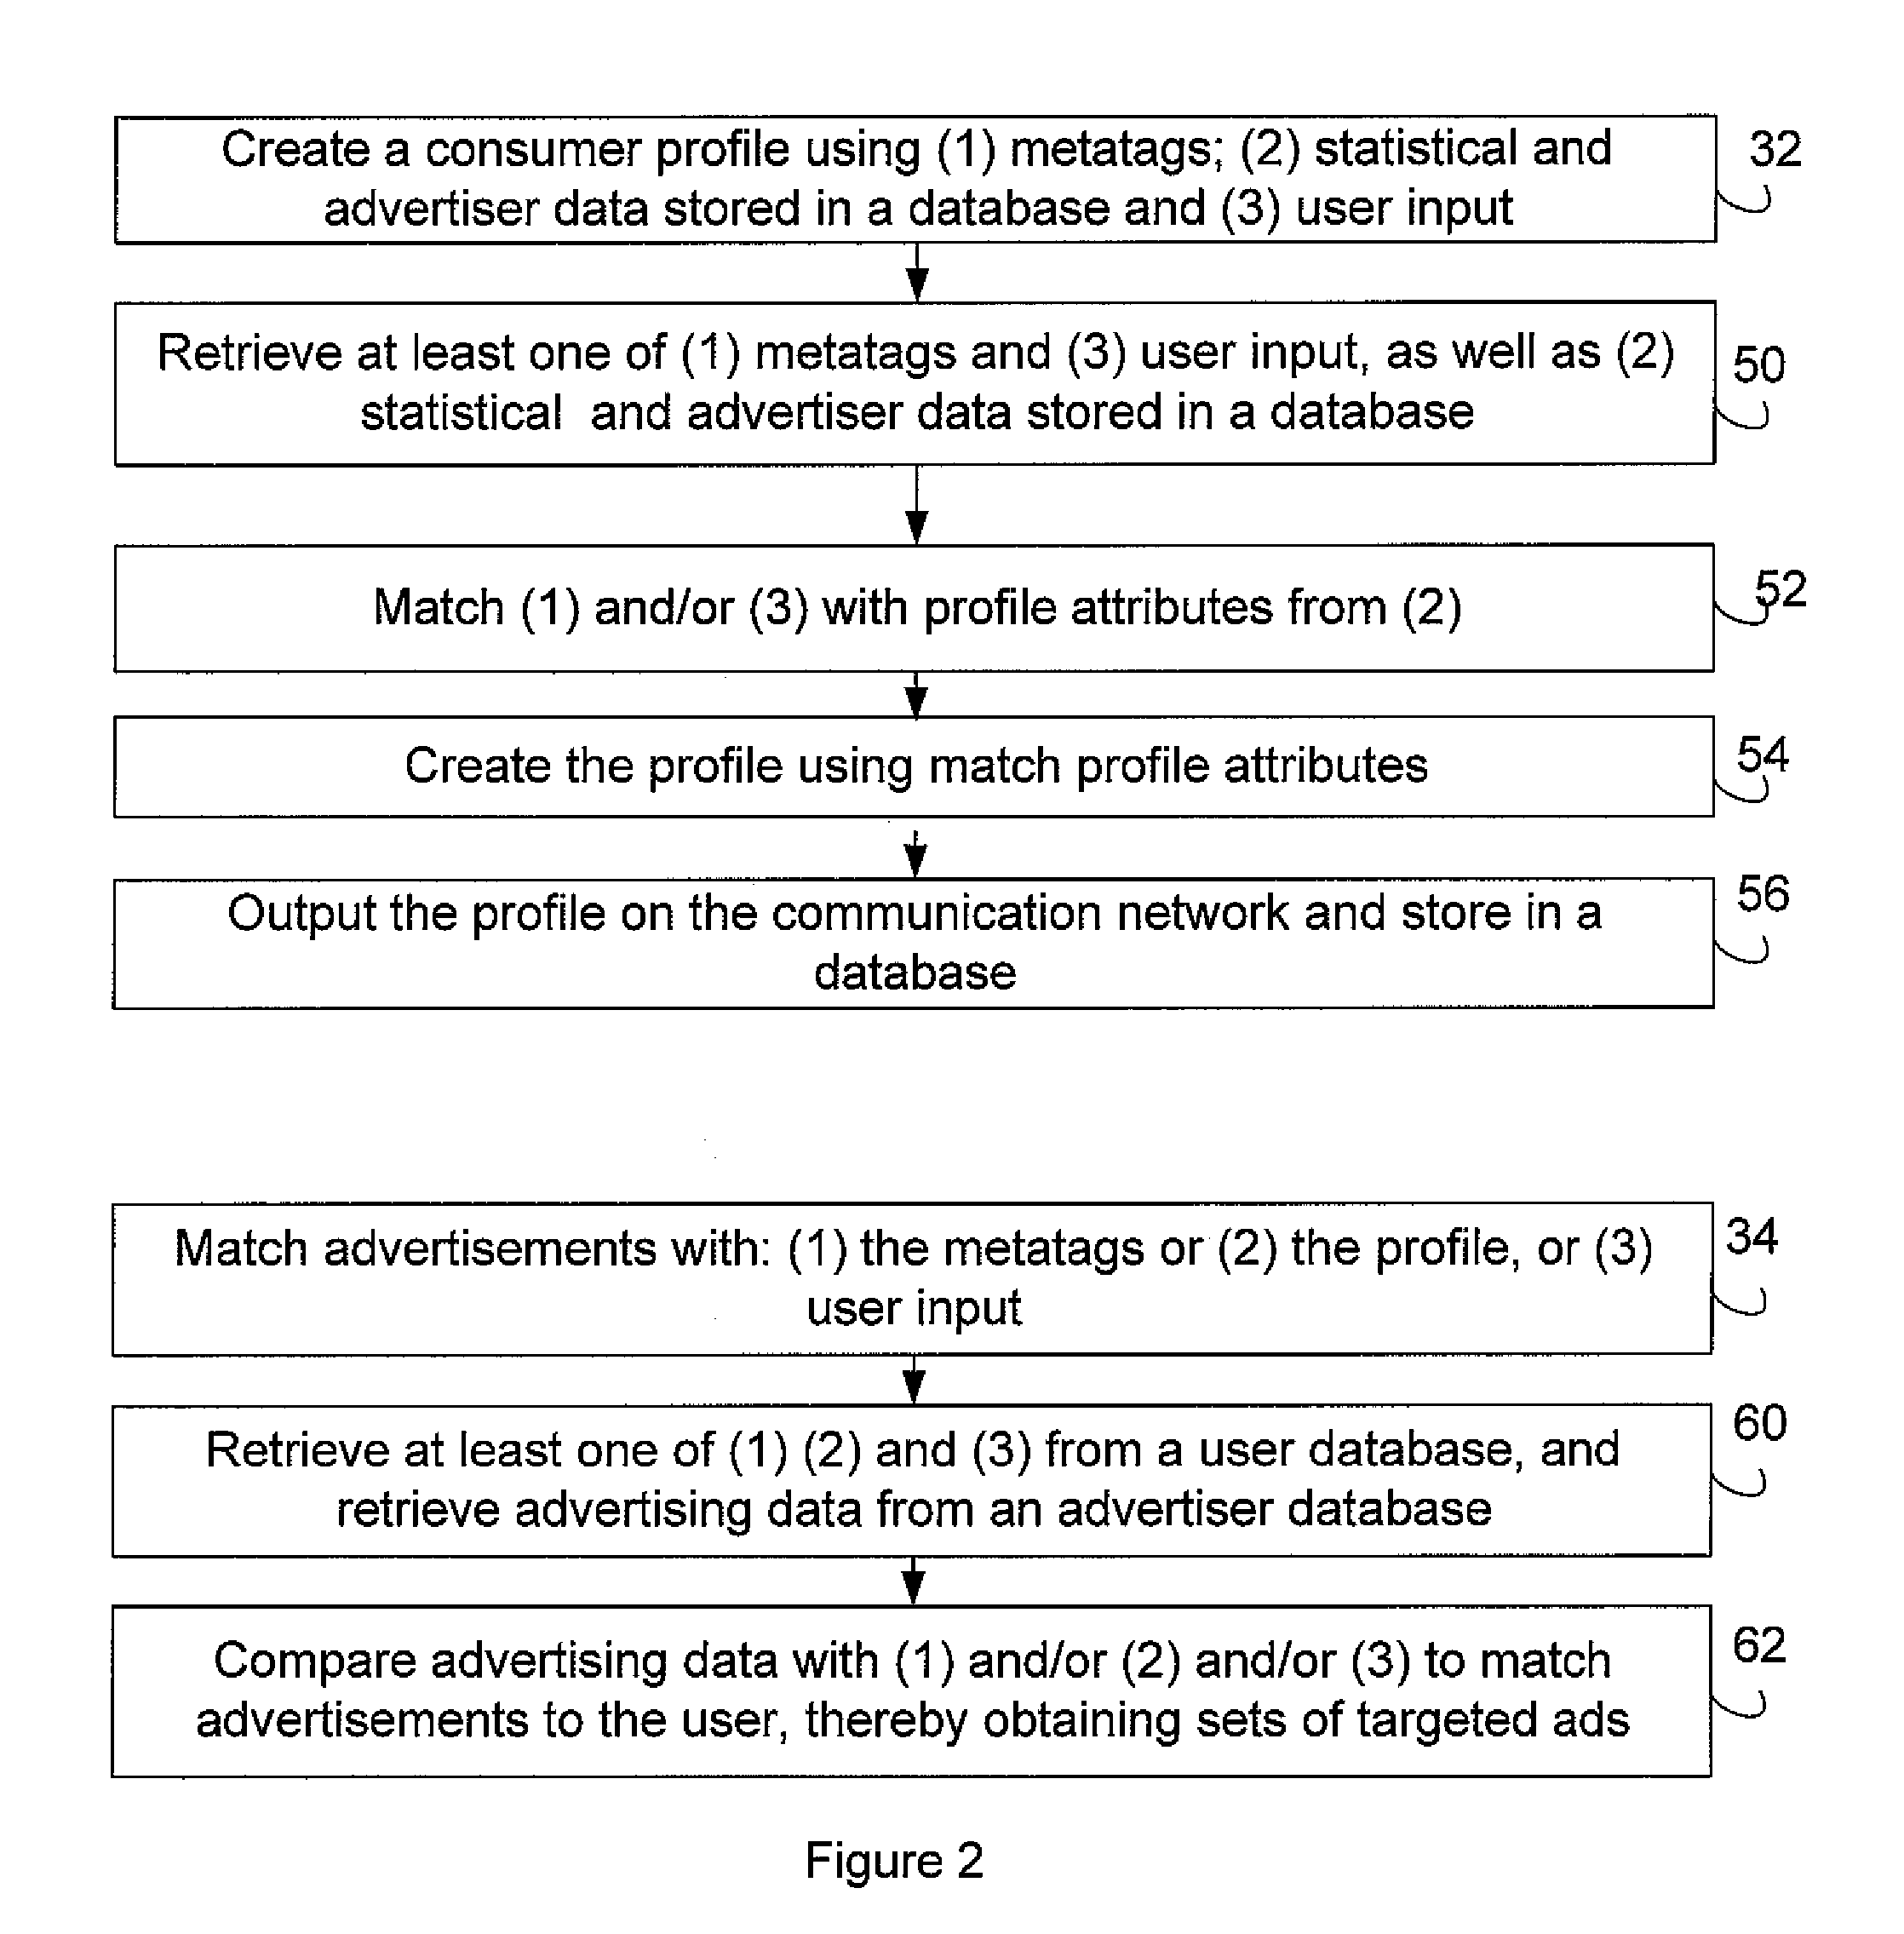 Method and system for image and video analysis, enhancement and display for communication